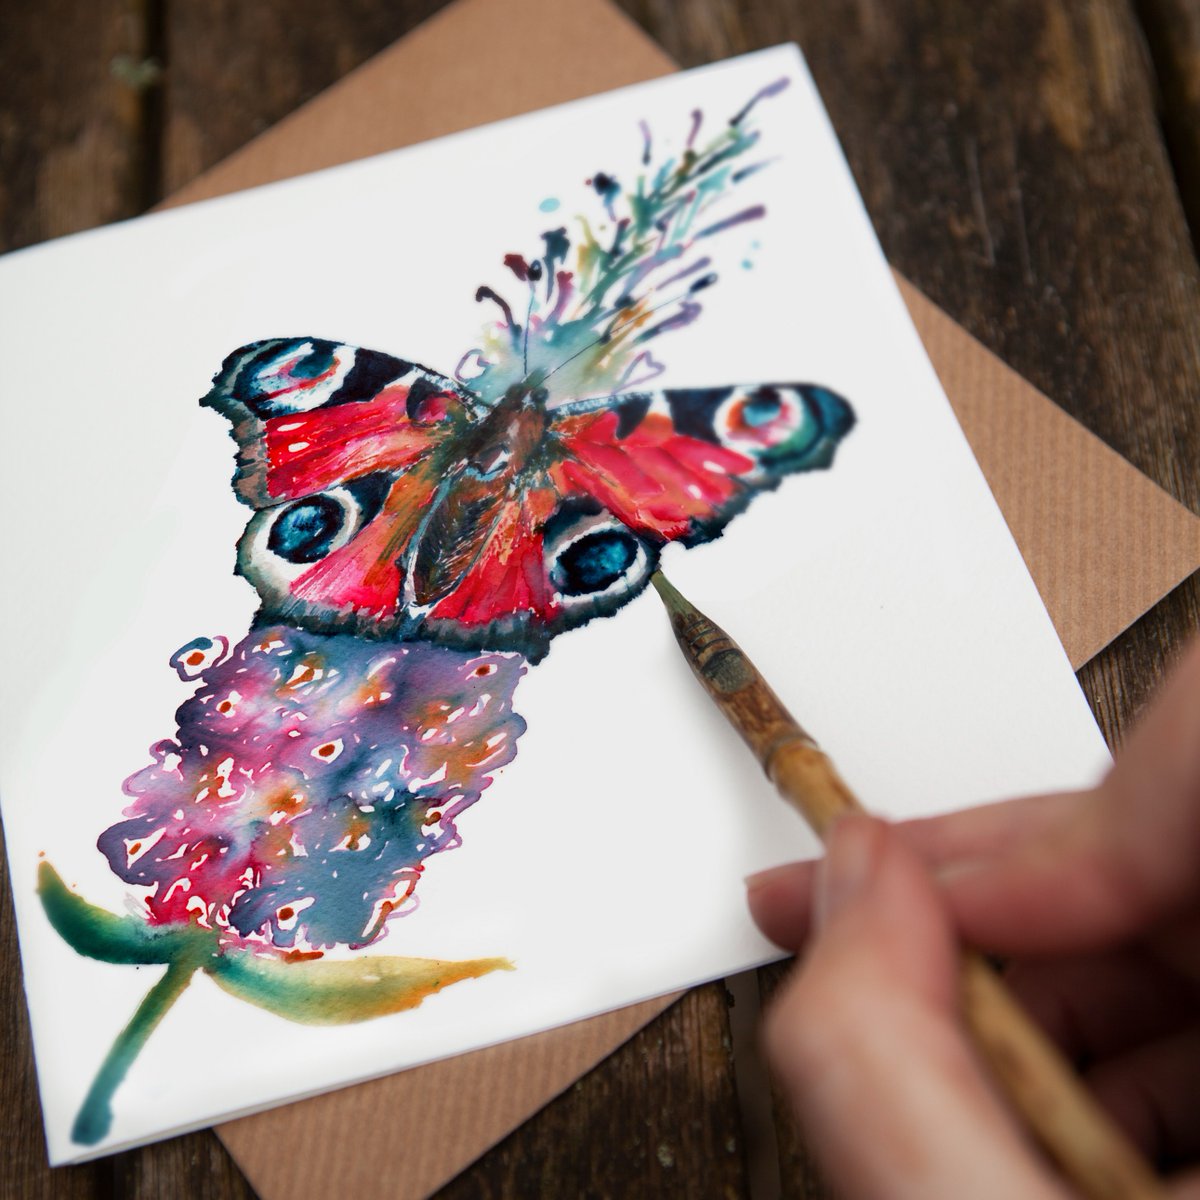 Our Craft Club is BACK! 🙌 Join artist Kate Moby live on the 1 June to create your very own inky Peacock butterfly greetings card 🦋✒️ Unleash your creativity while raising critical funds for butterflies and moths in the UK. Order your craft kit here 👉 katemoby.com/store/p998/1st…